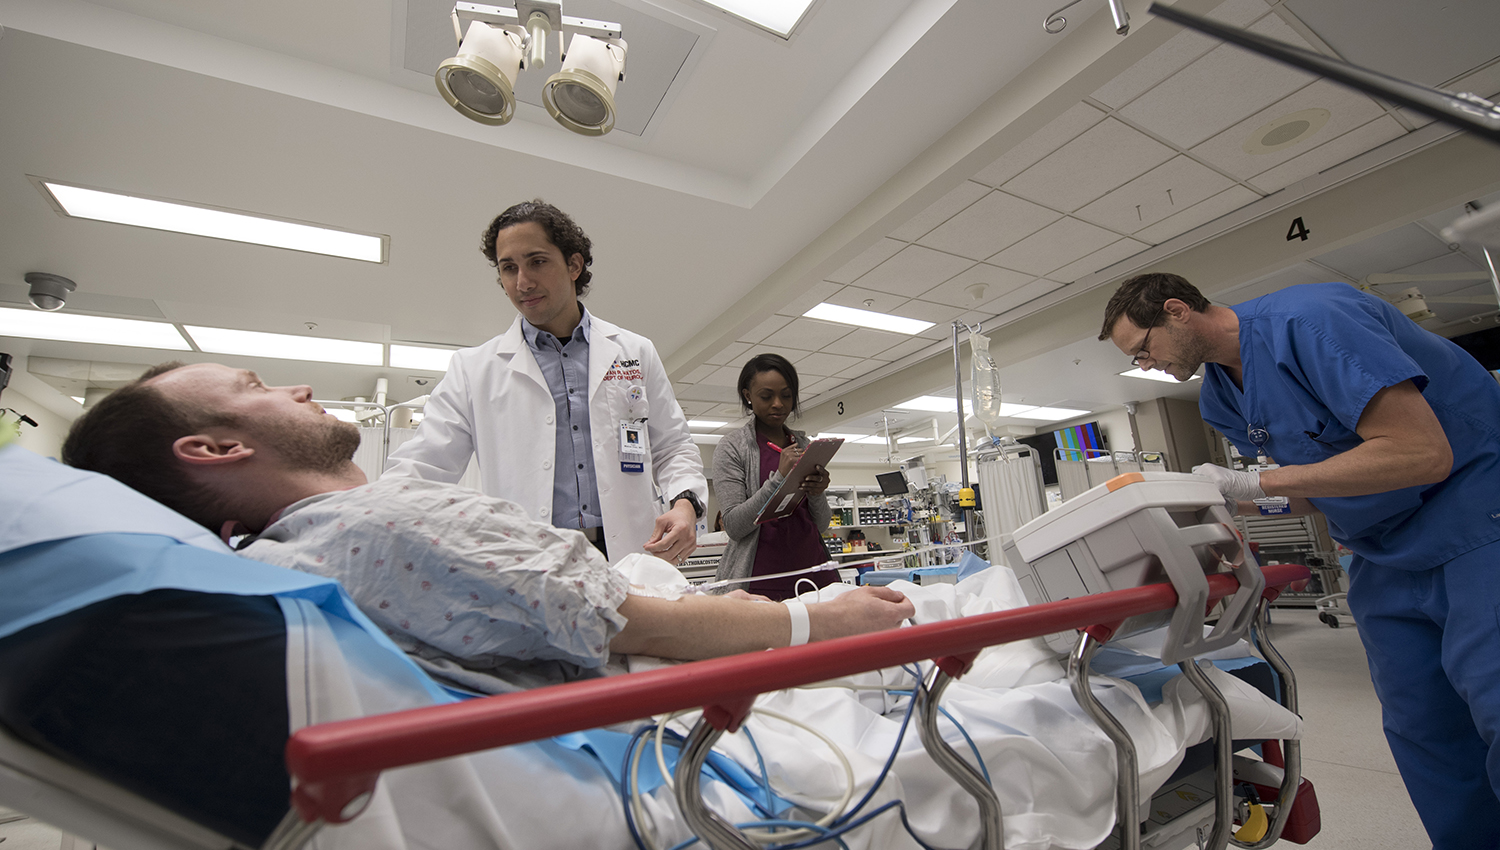 emergency medicine providers assisting patient in bed